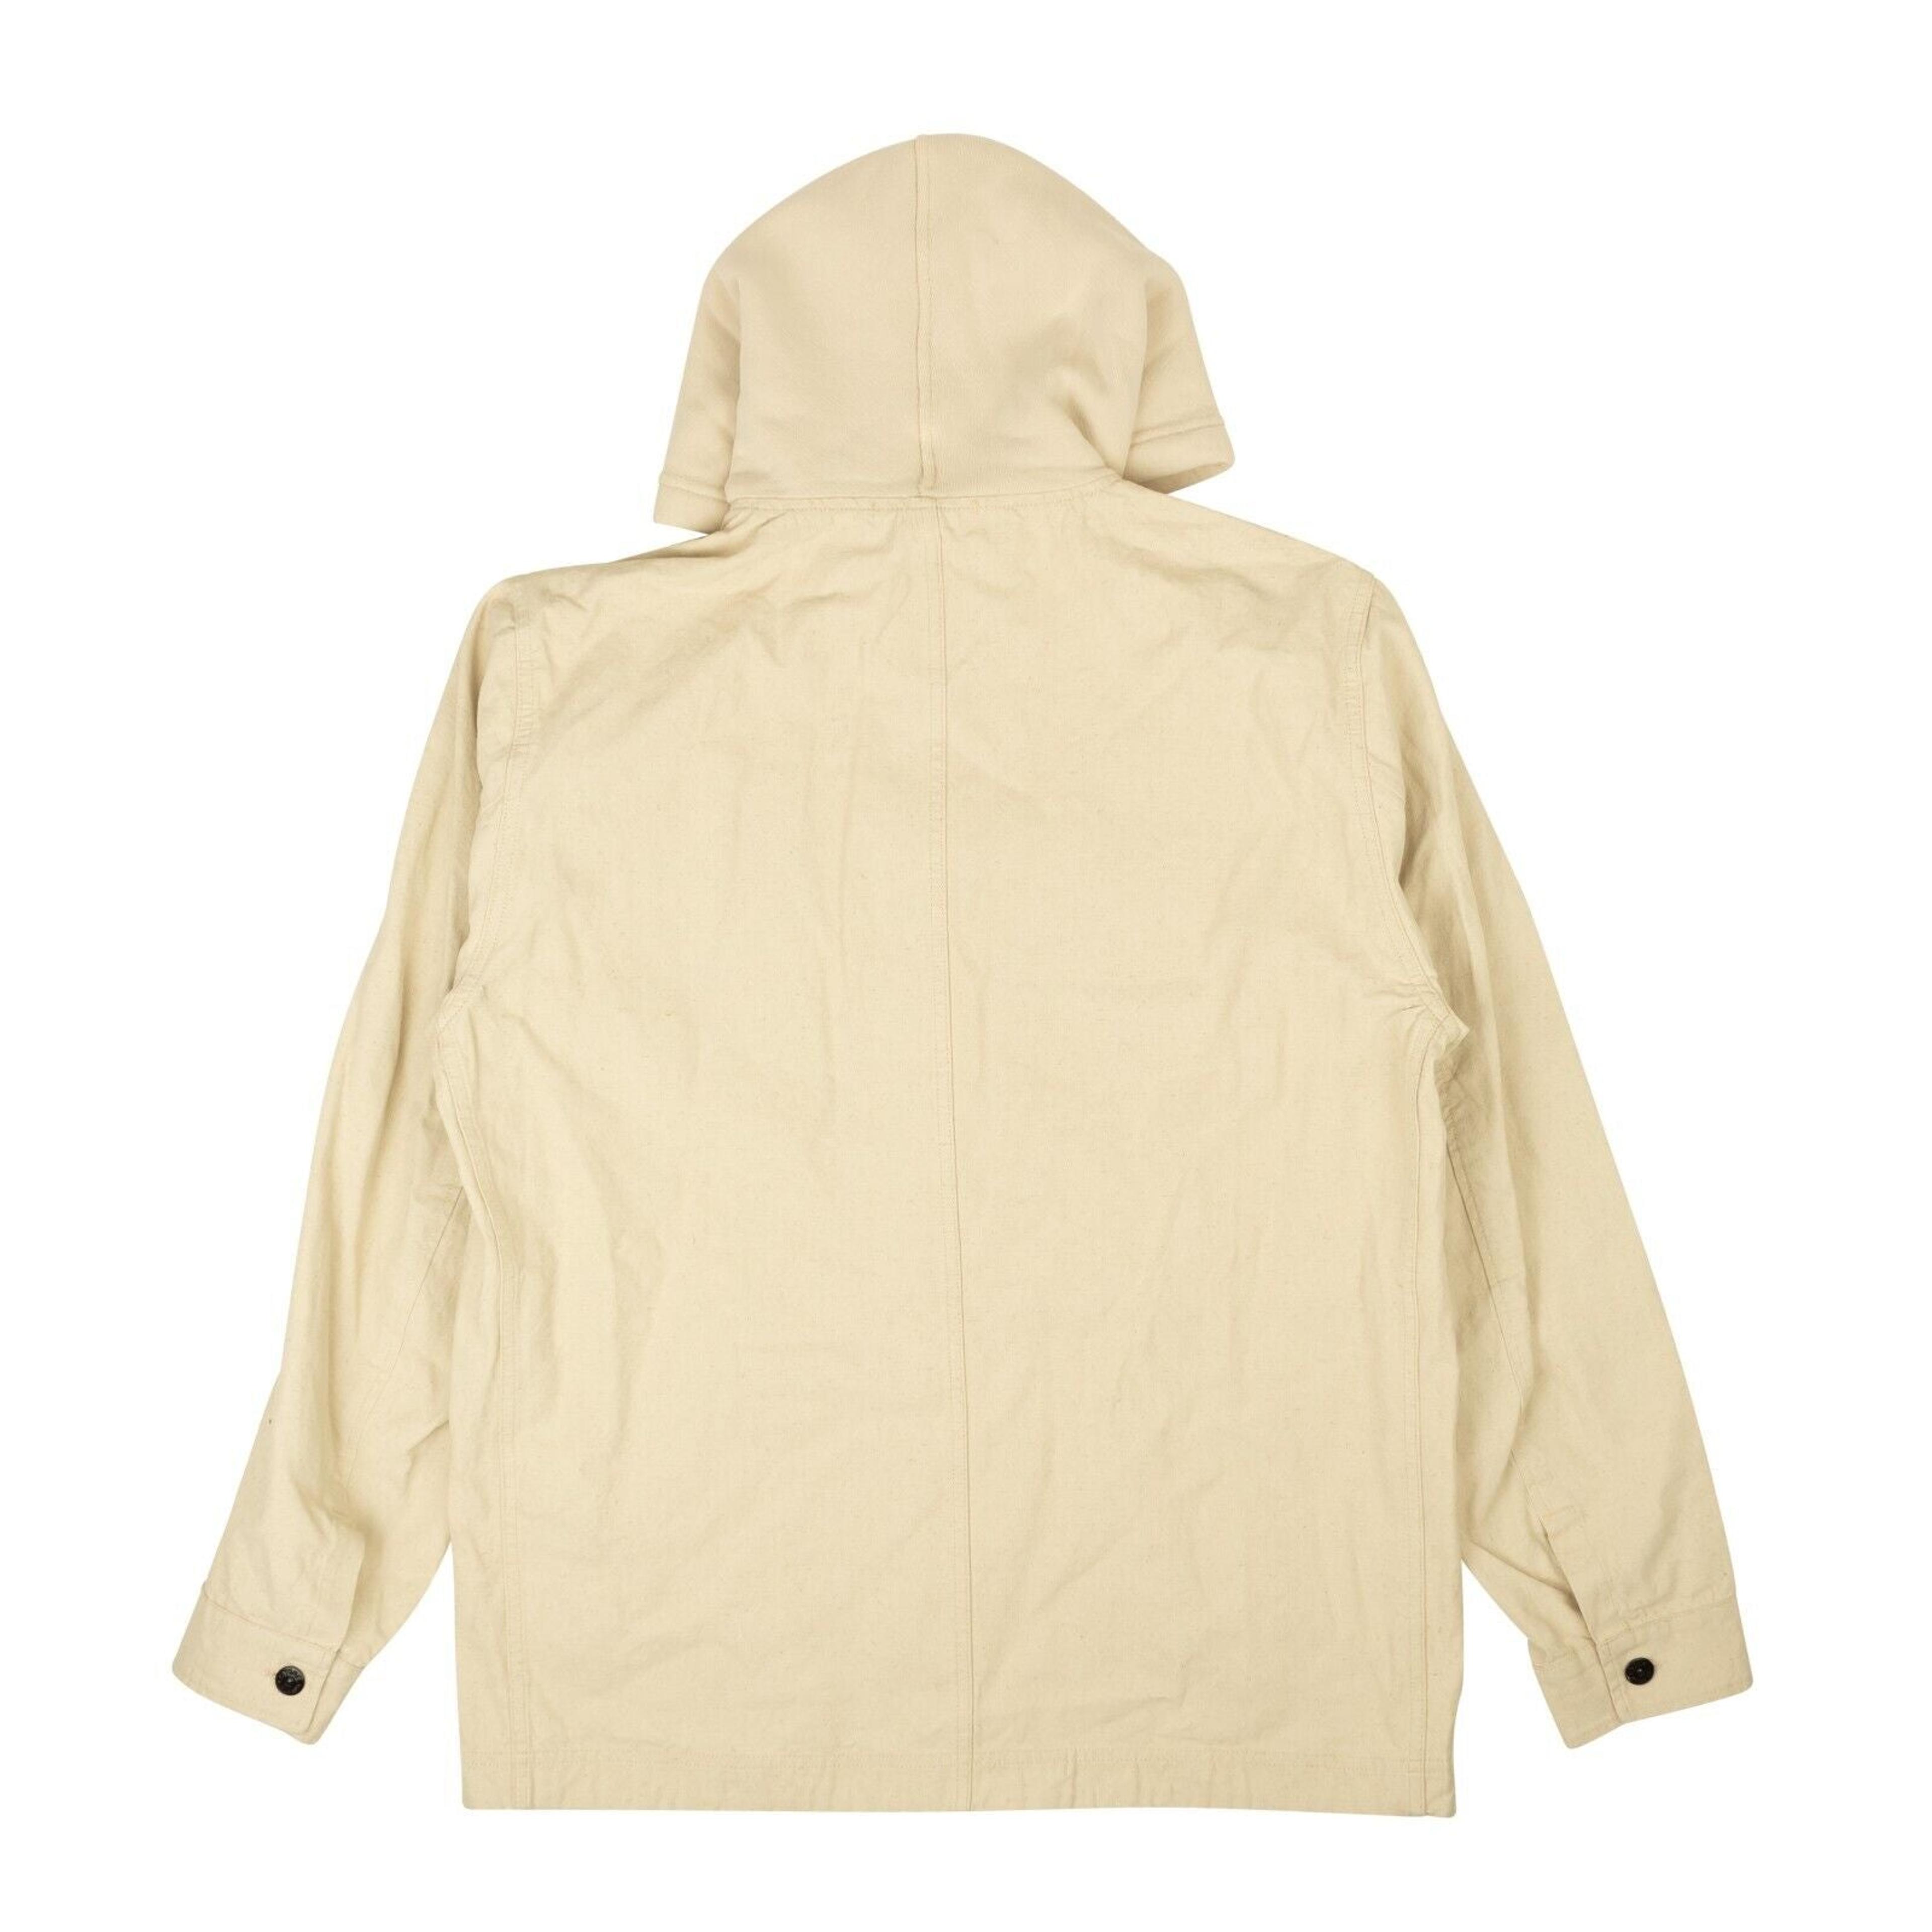 Alternate View 2 of Oatmeal Ivory Panama Placcato Hooded Jacket